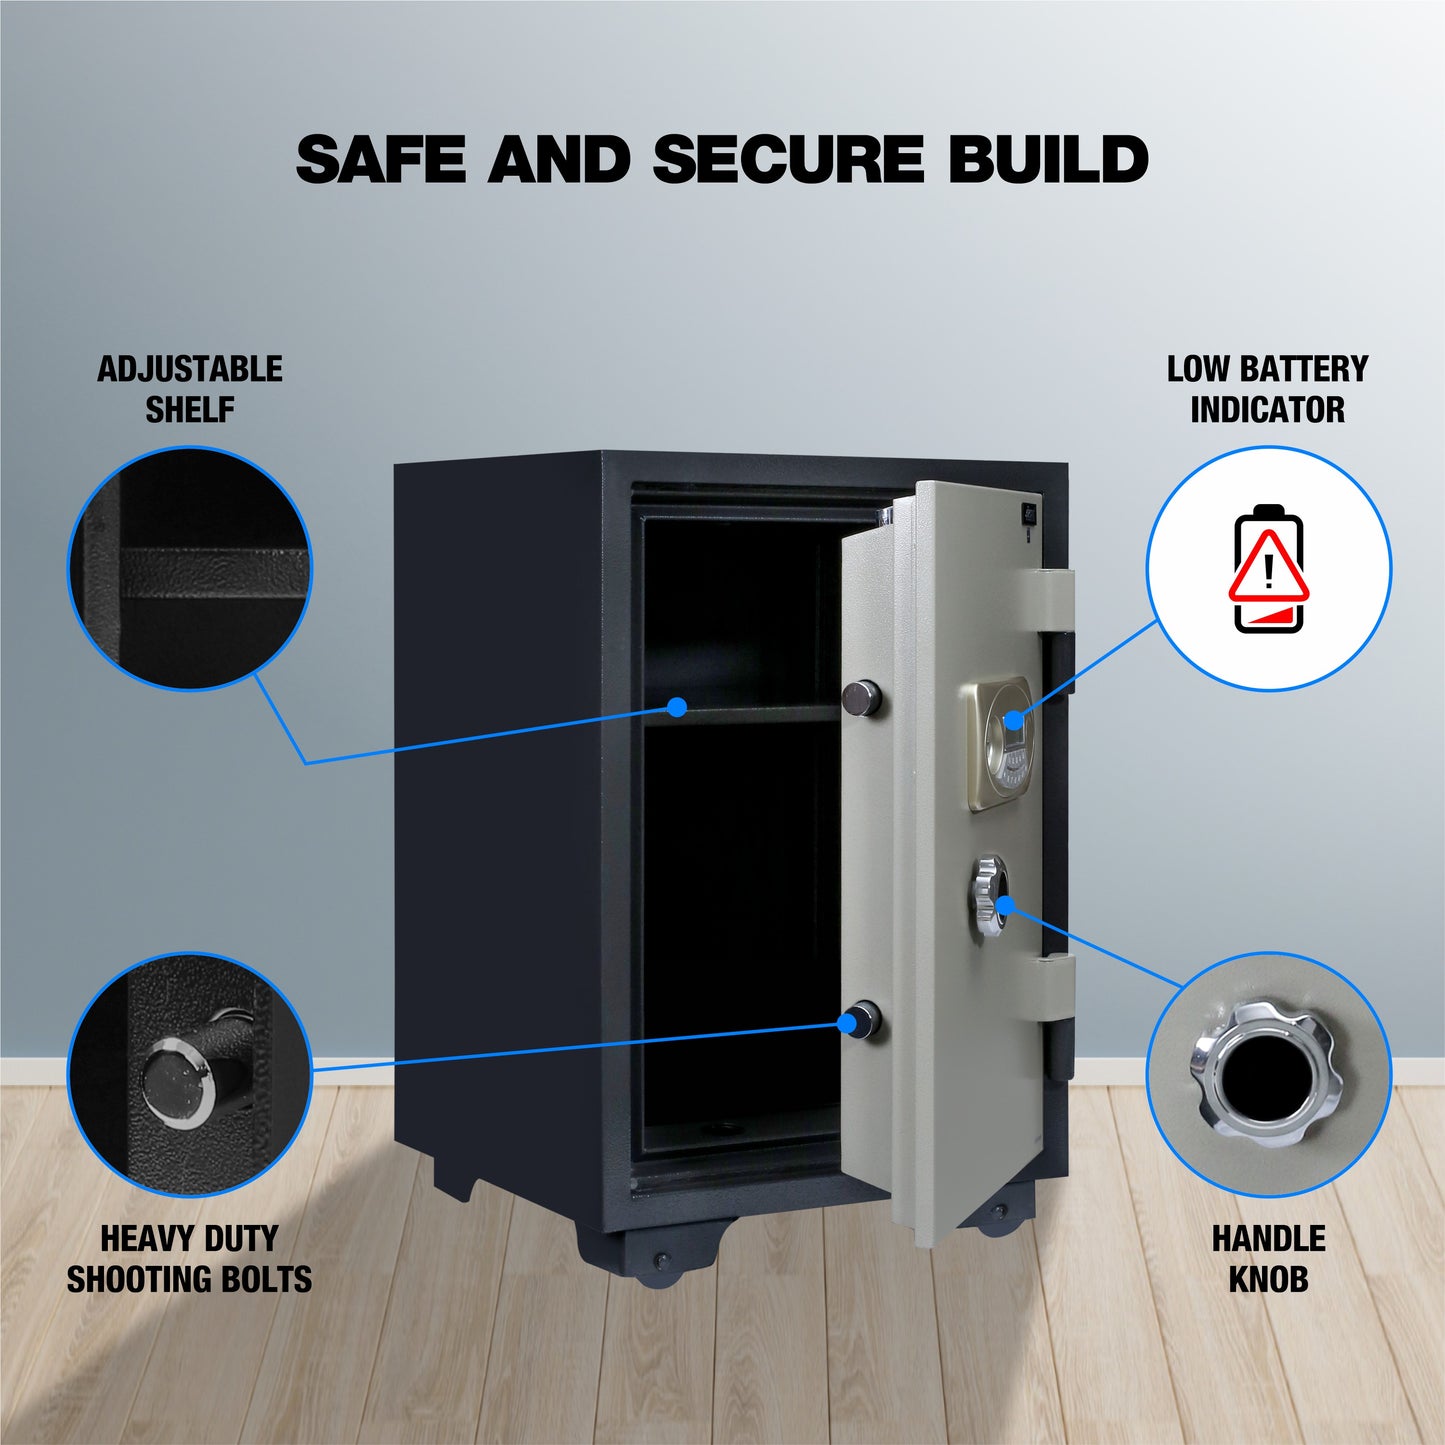 Ozone Fire Warrior- 55 | Fire-resistant Safe | 40 Litres